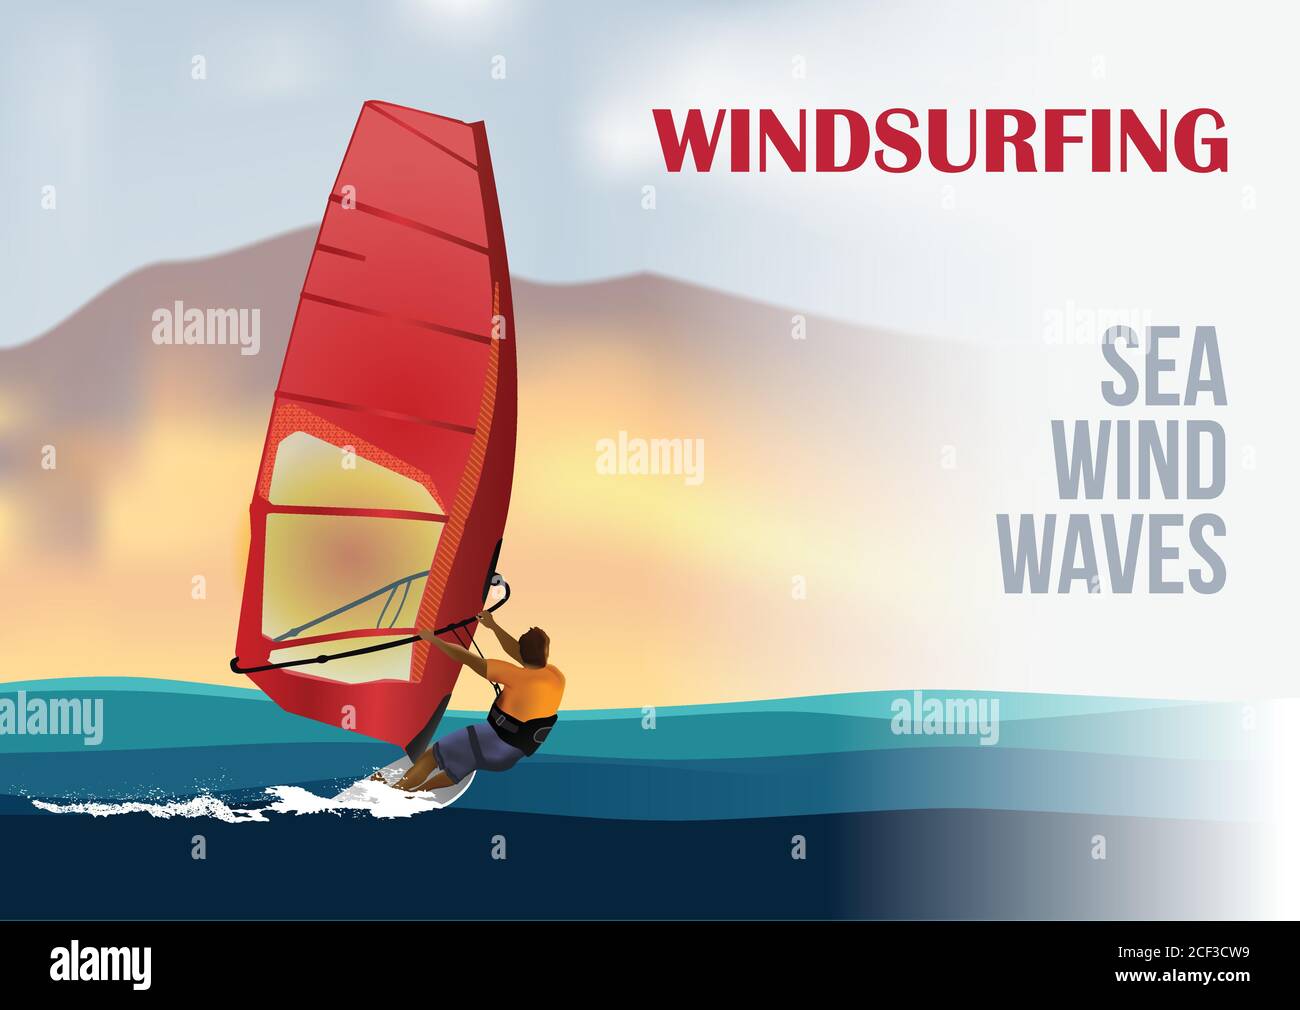 https://c8.alamy.com/comp/2CF3CW9/windsurfer-is-riding-the-waves-during-a-sunset-scene-with-the-red-sail-in-the-blue-sea-water-vector-illustration-2CF3CW9.jpg